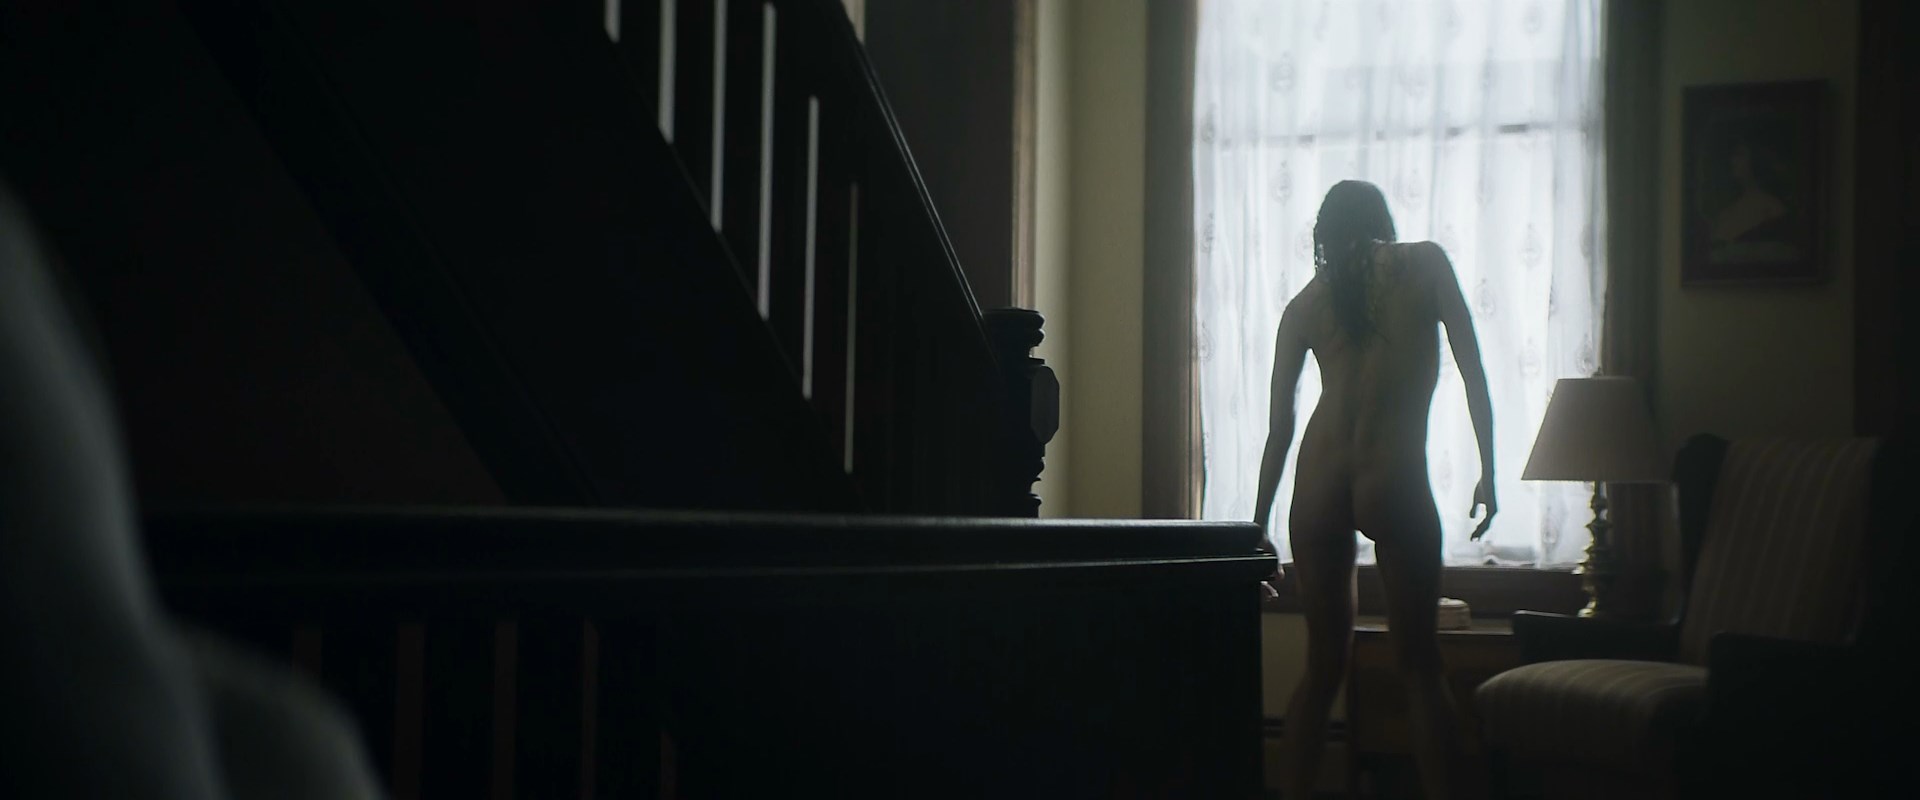 Gabriela Quezada Bloomgarden sexy, Zarah Mahler nude - The Wretched (2019)